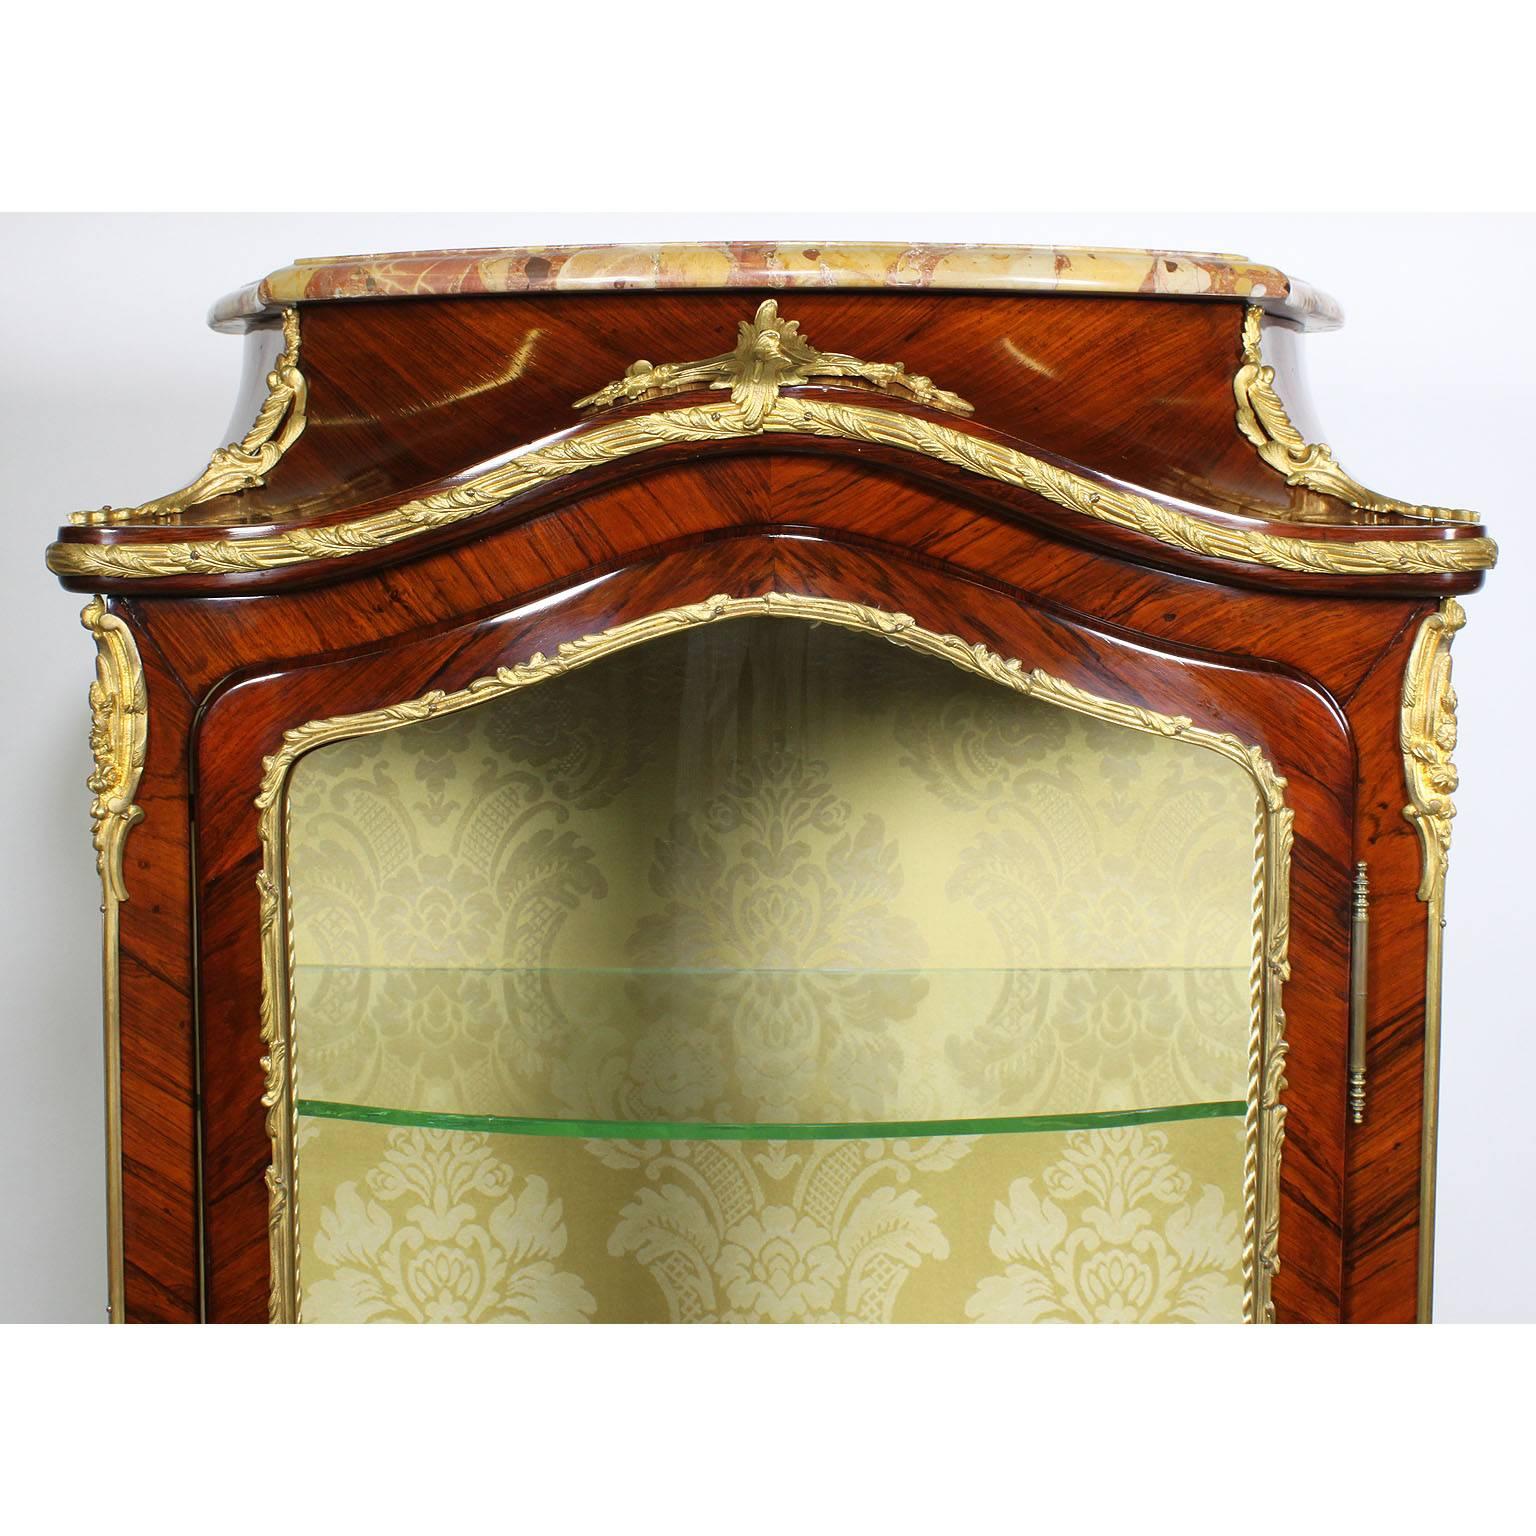 French 19th Century Louis XV Style Gilt Bronze-Mounted and Vernis Martin Vitrine In Good Condition For Sale In Los Angeles, CA